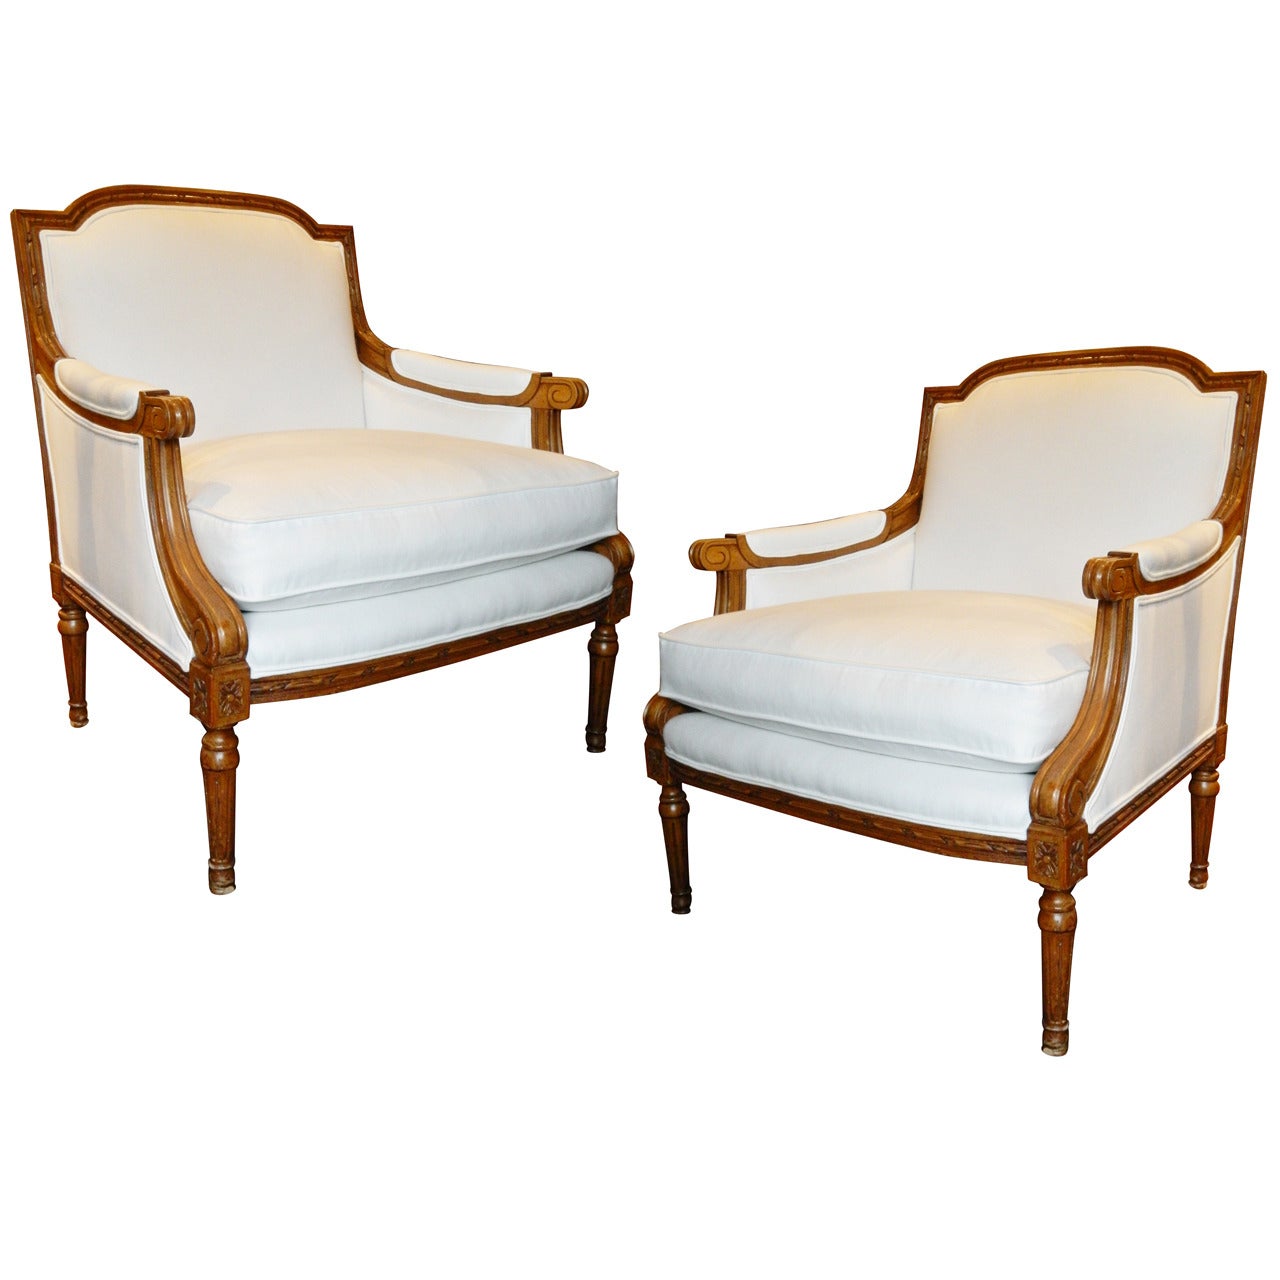 Early 20th Century Pair of Upholstered Bergere Chairs in the Louis XVI Style